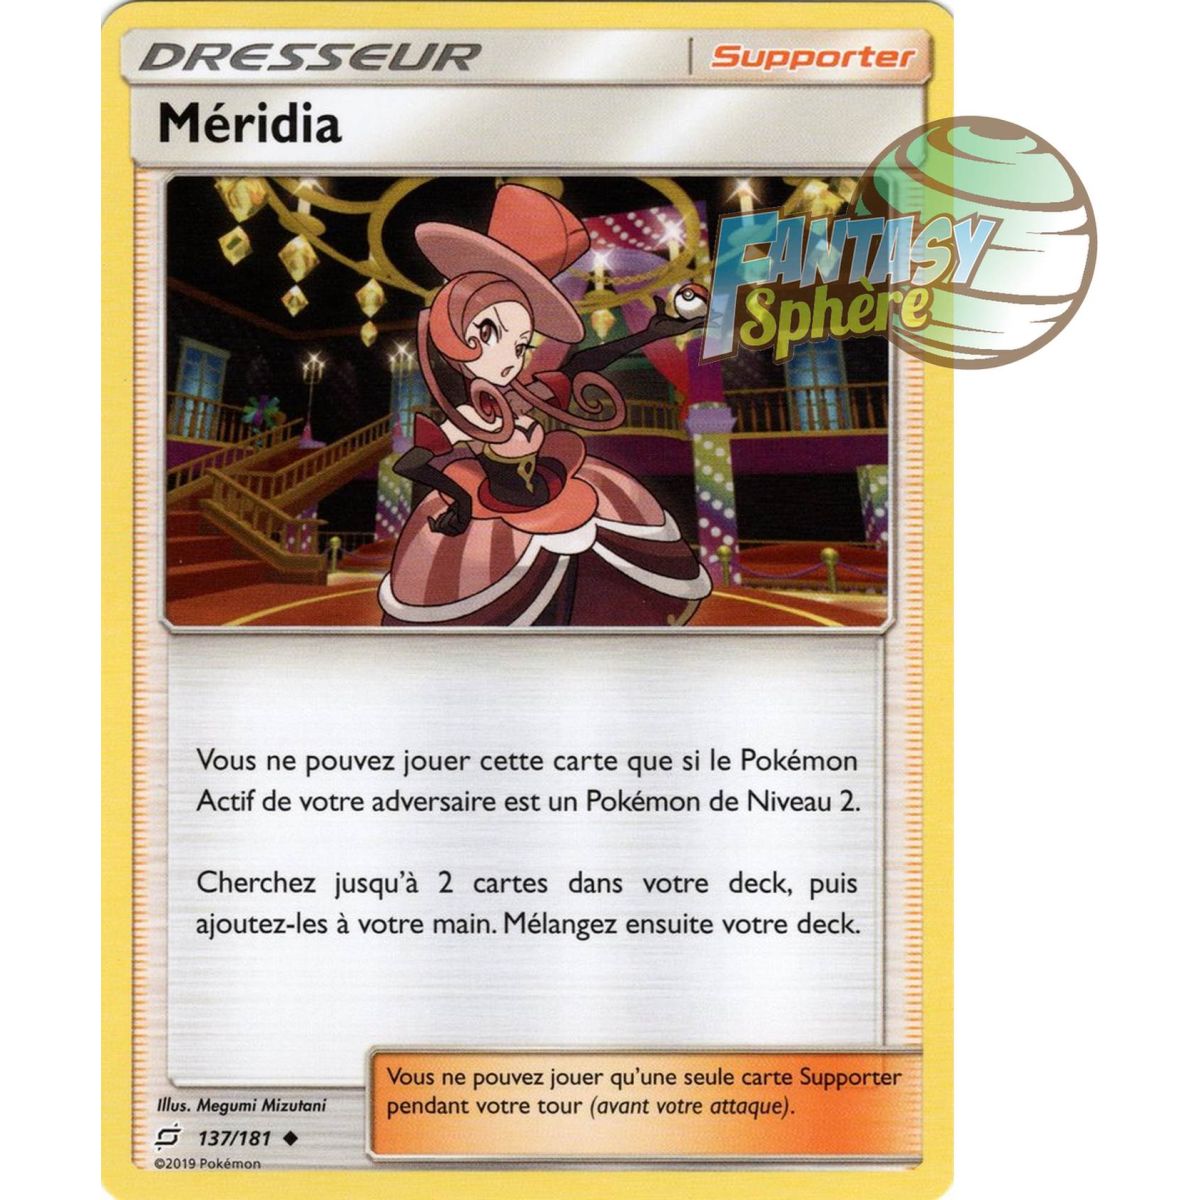 Méridia - Uncommon 137/181 - Sun and Moon 9 Shock Duo